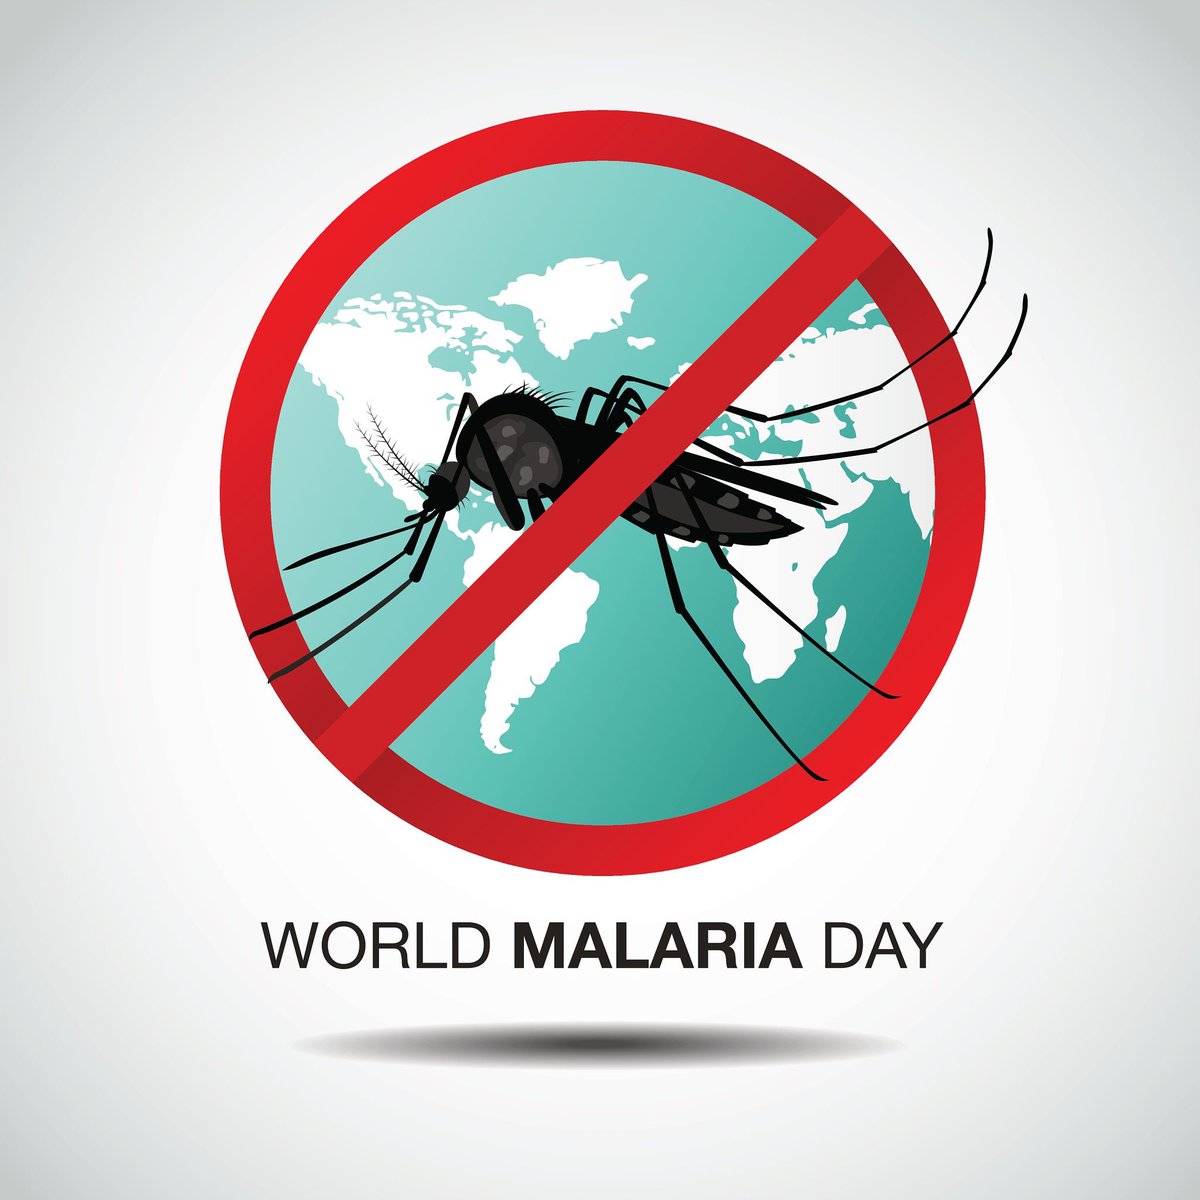 Today,the world marks World Malaria Day. A reminder that innovation is key to eliminating malaria. Let's harness new technologies and approaches to protect pregnant women and their babies from this preventable disease. #2024WMD #ActNow #InnovateIntegrateEngage